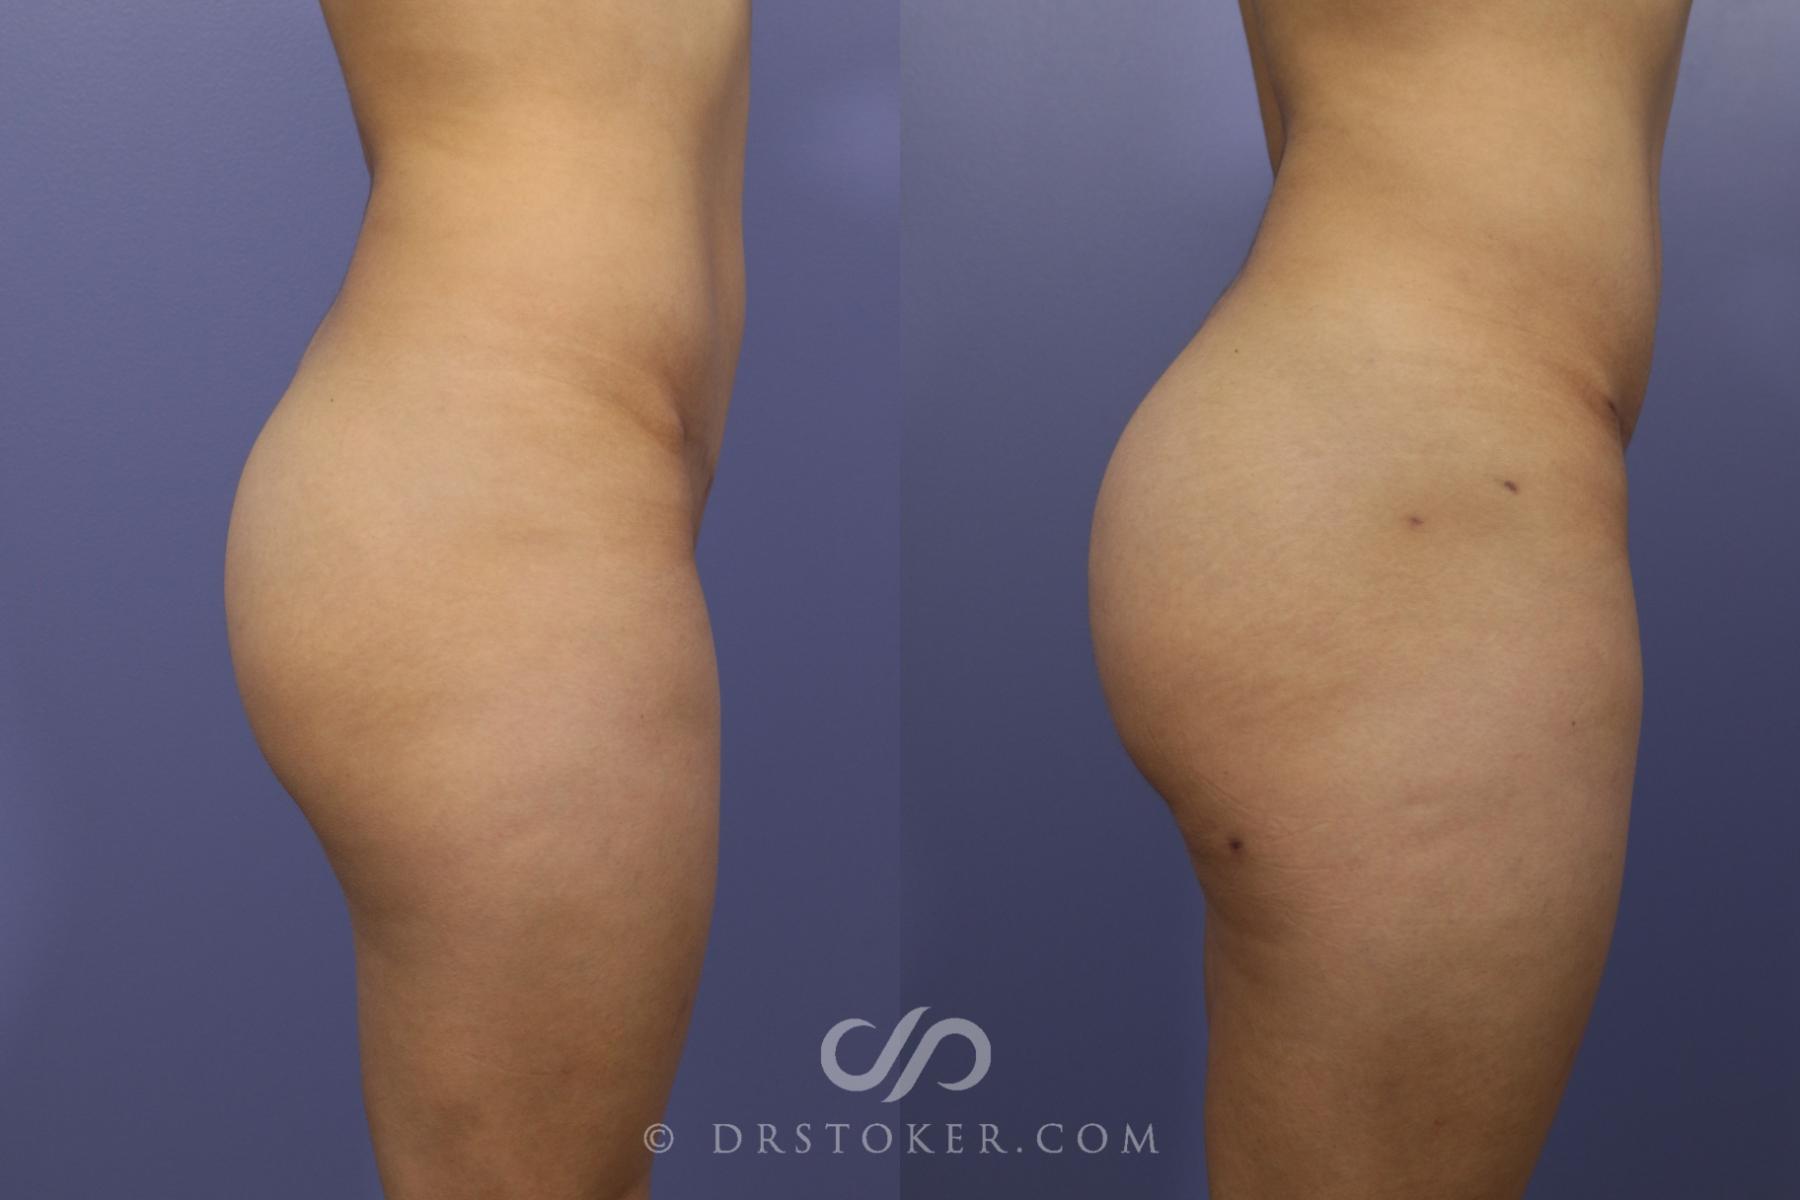 Brazilian Butt Lift Surgery: Before and After Pictures